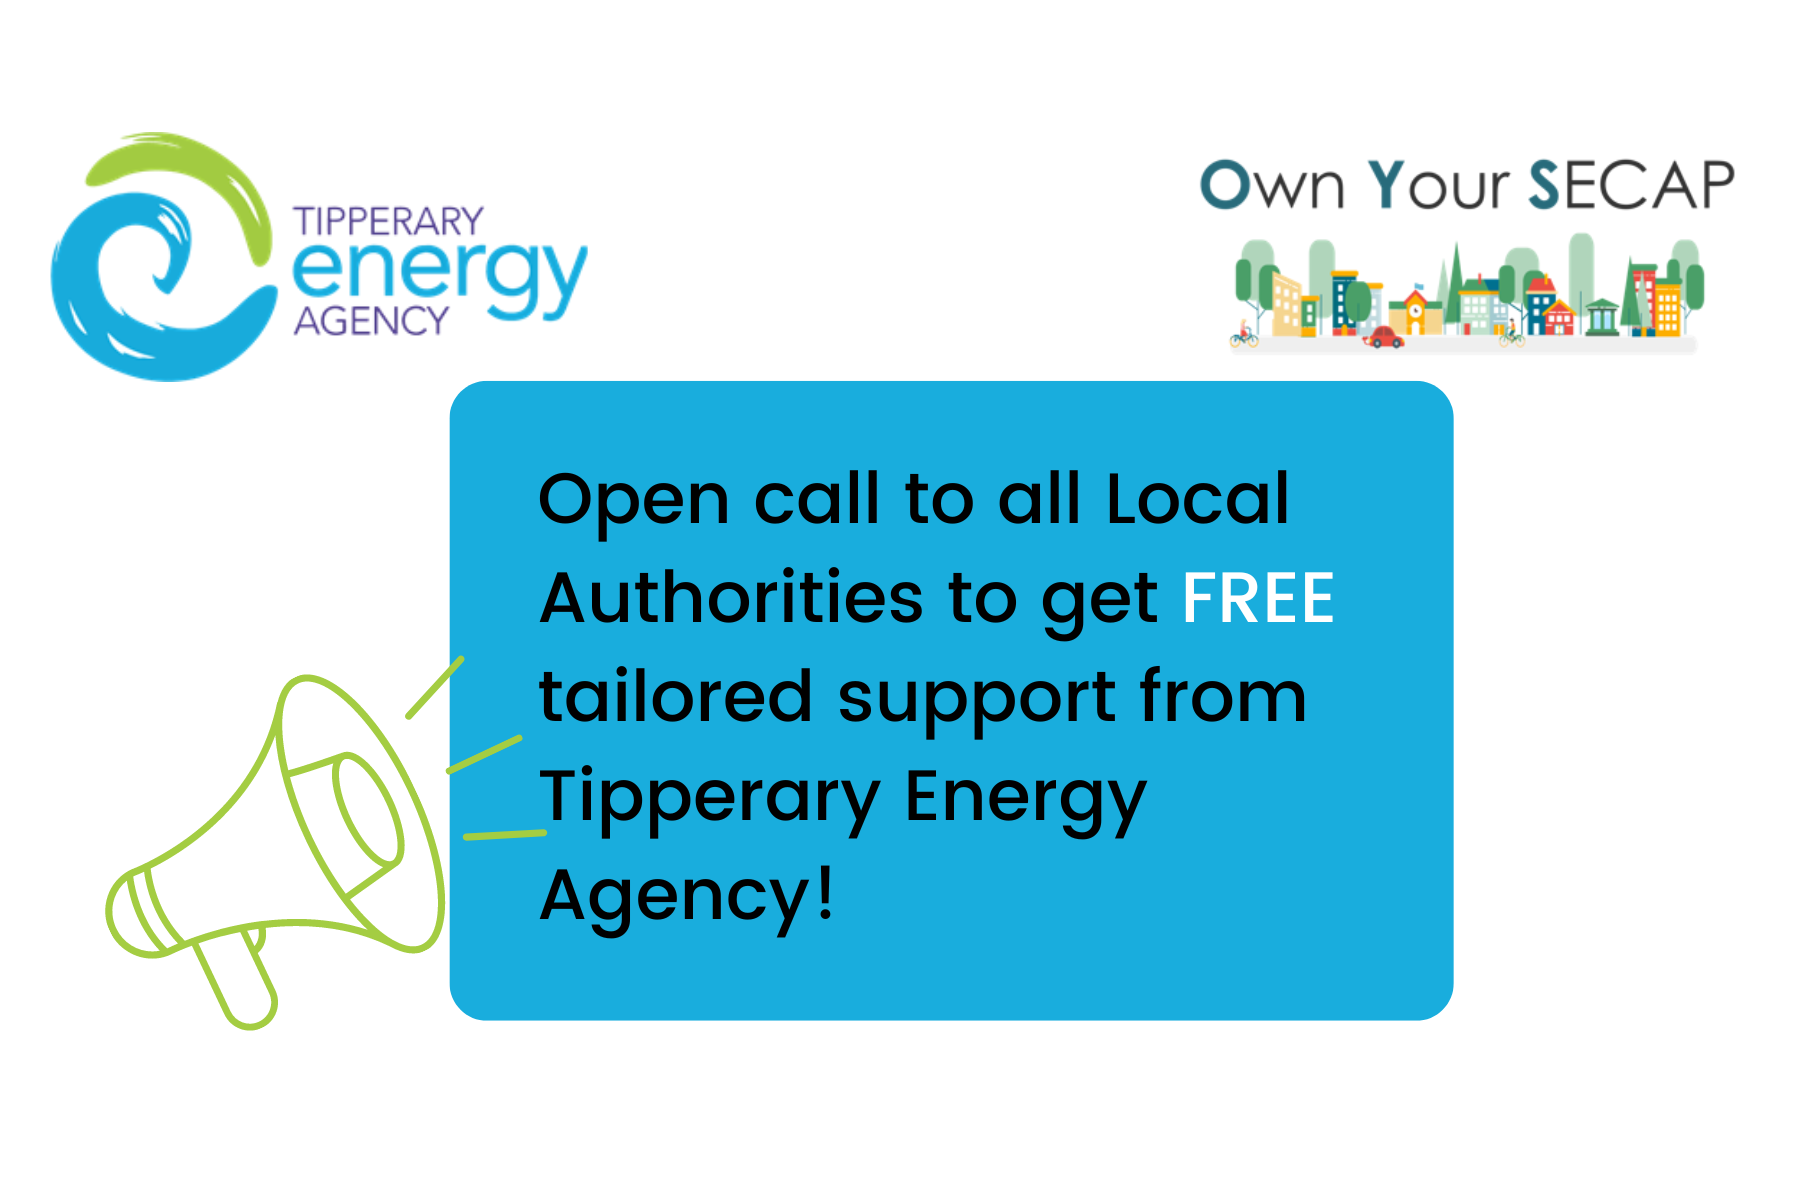 Call to Local Authorities to get FREE tailored support from Tipperary Energy Agency.